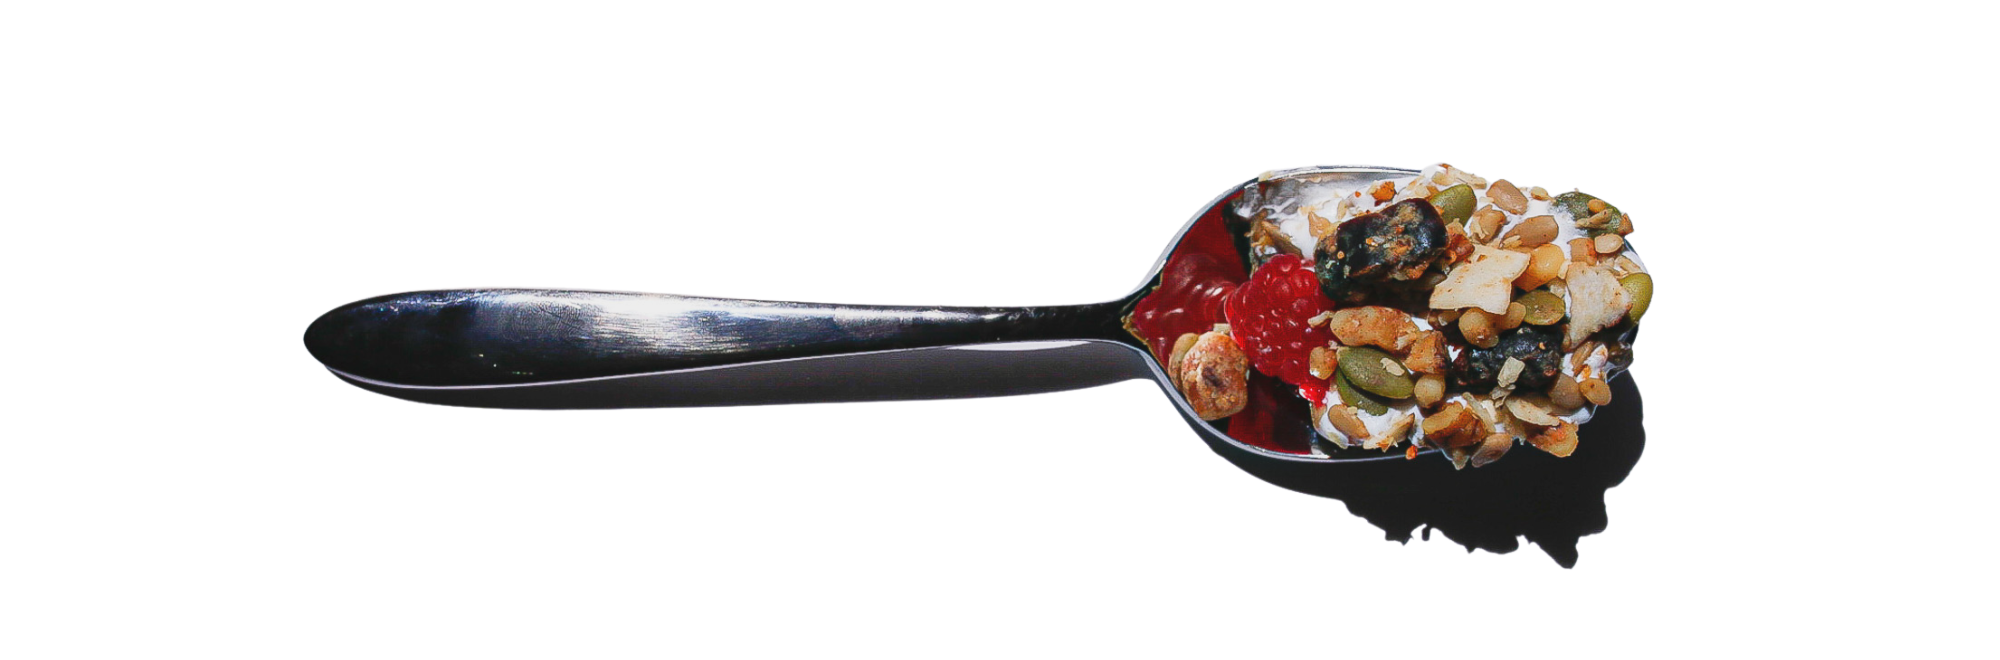 Image of Wildway spoon